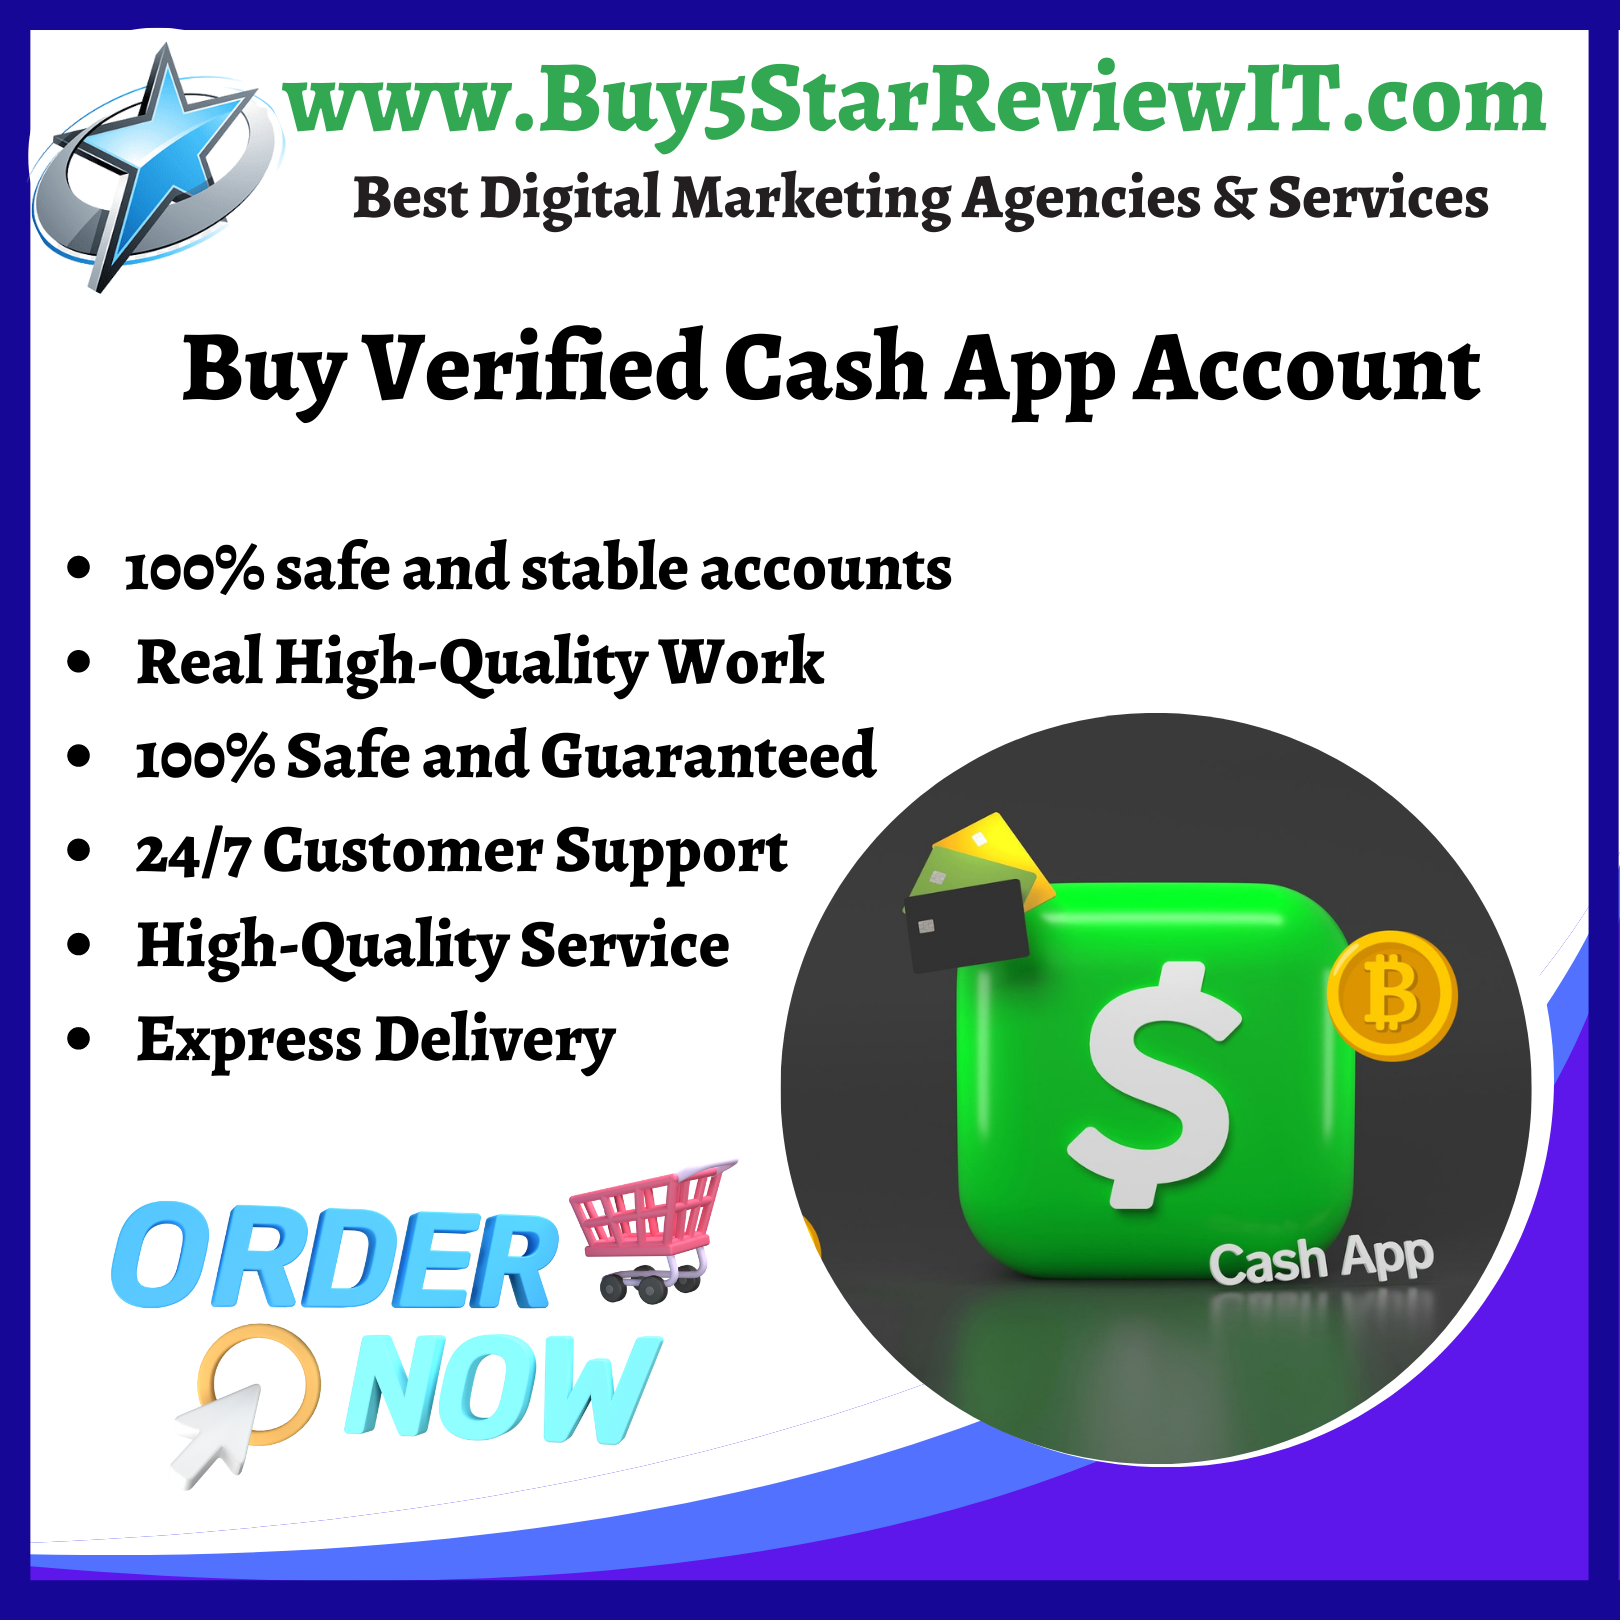 Buy Verified Cash App Accounts - Fully Verified & Cheap Price BTC Enabled